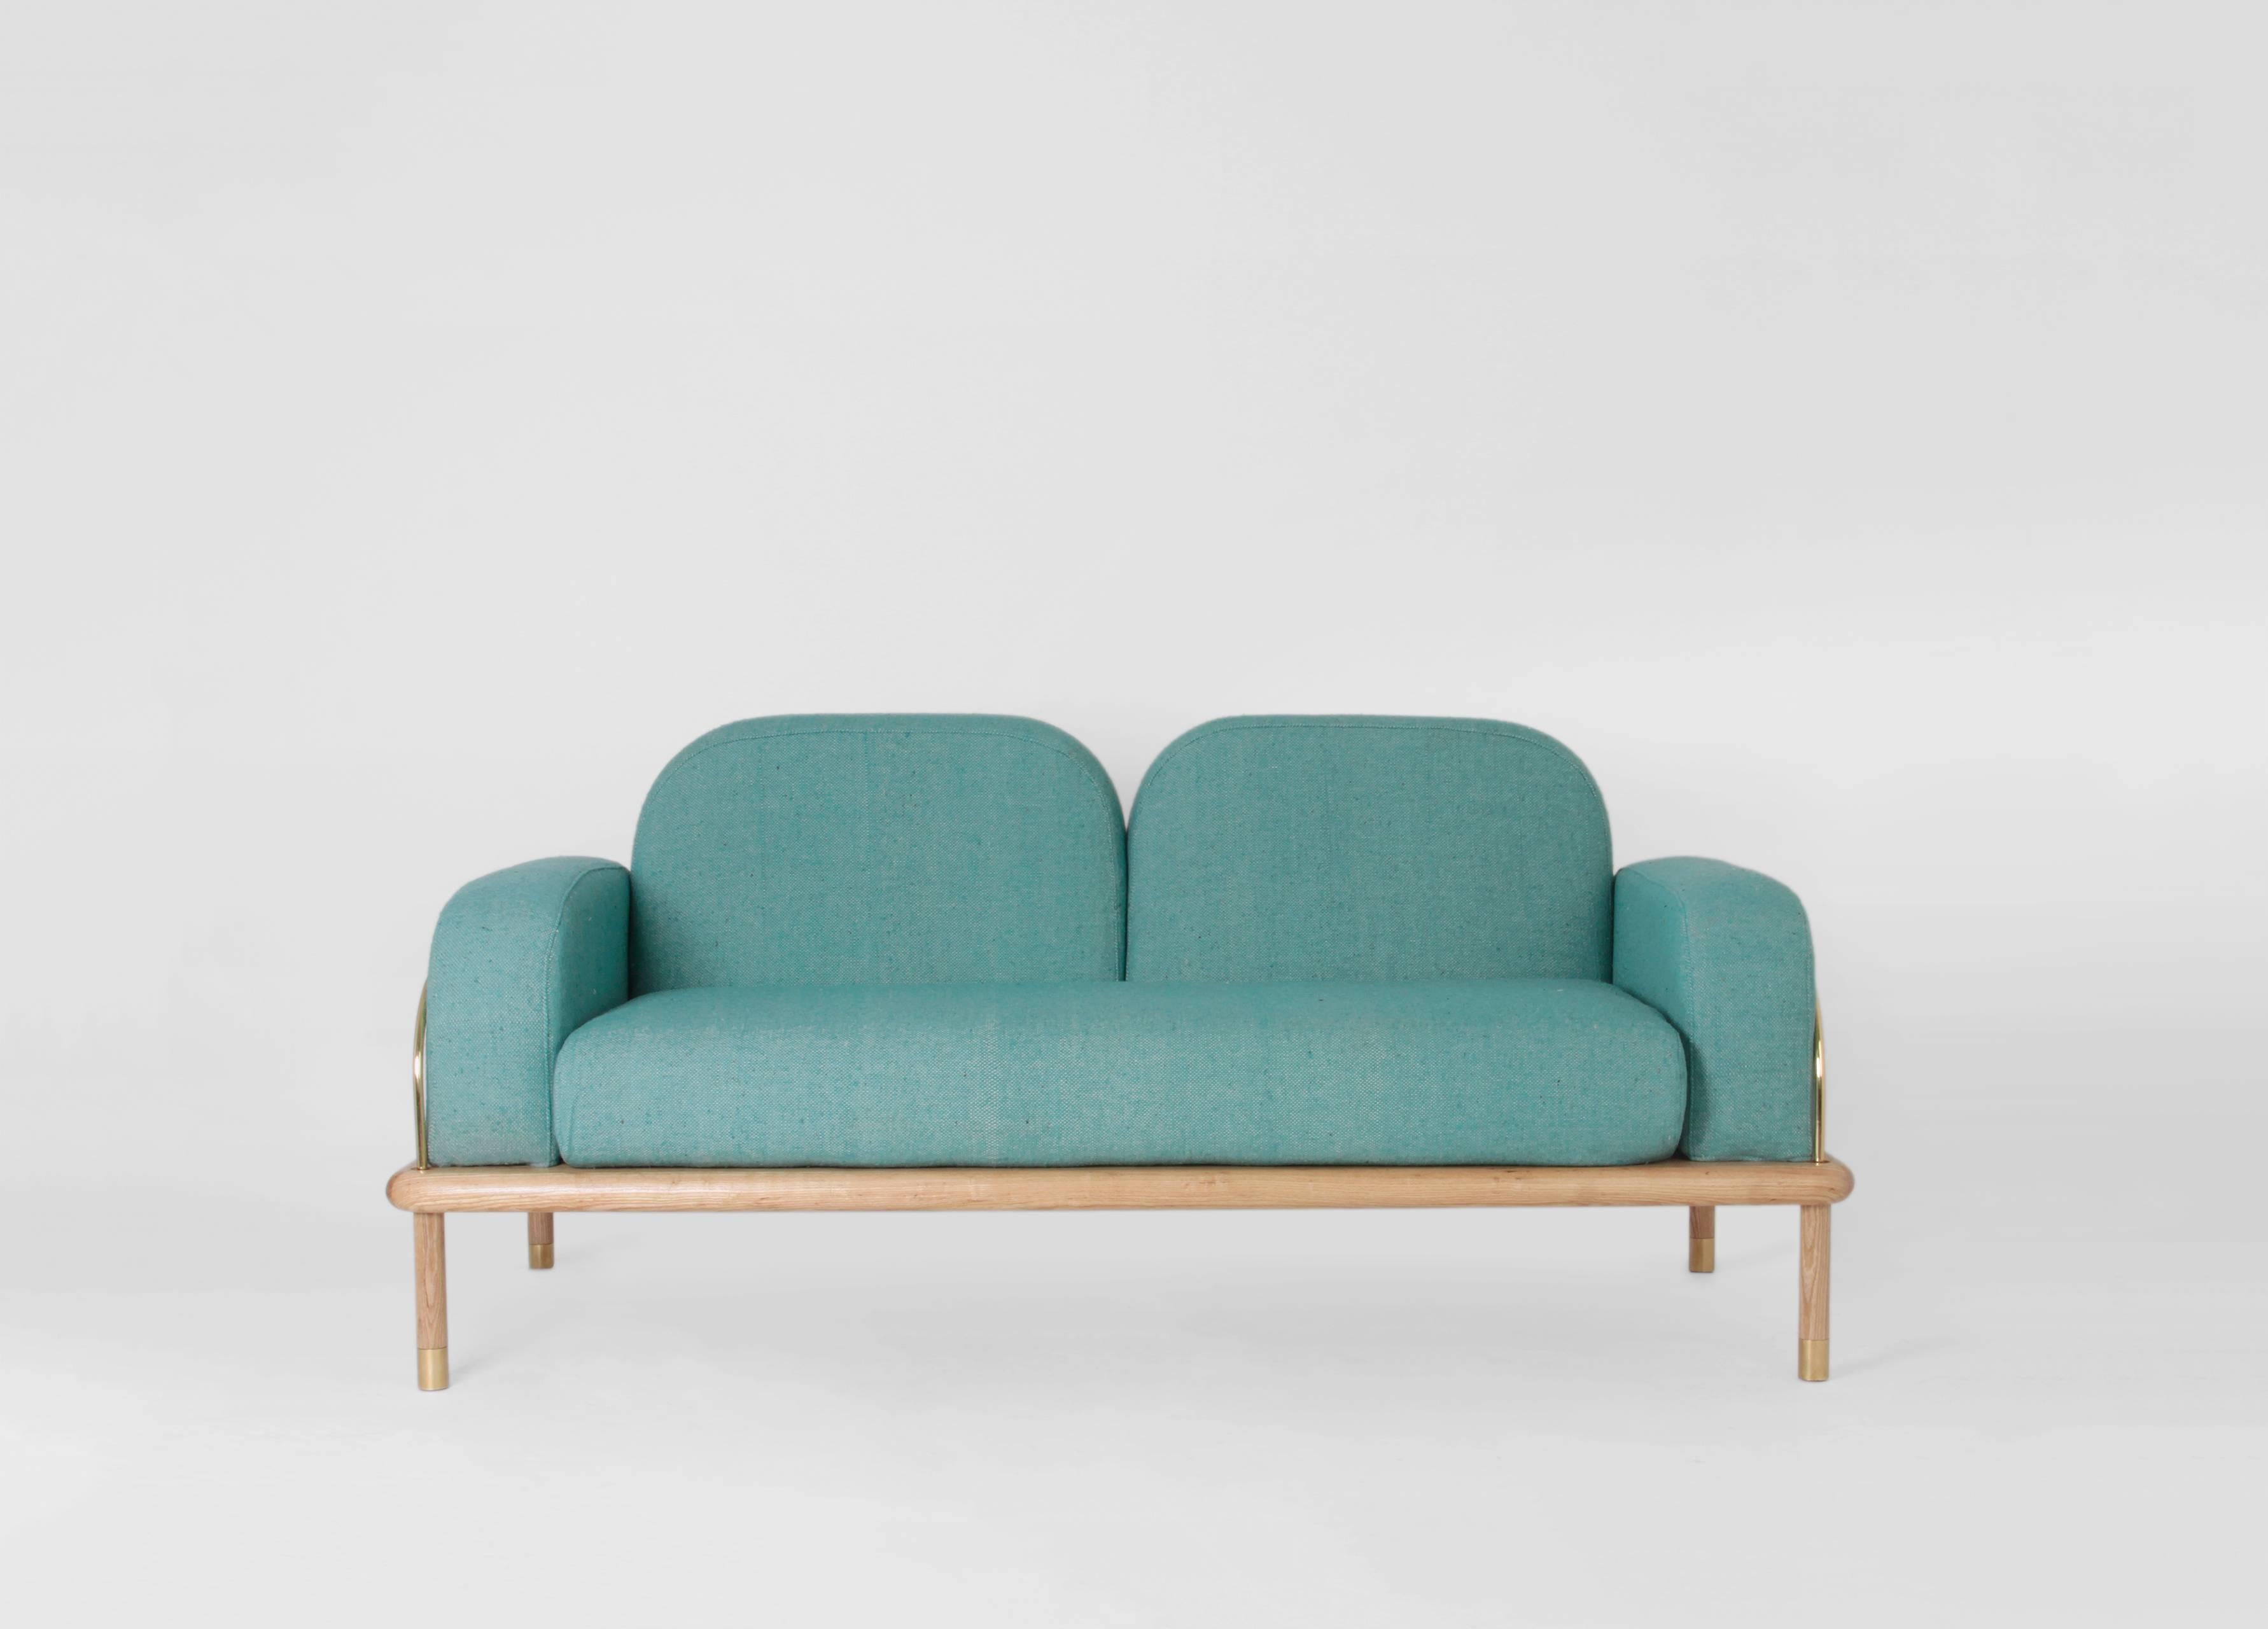 Modern Prado/Sofa in Parota Wood and Details in Cooper or Brass For Sale